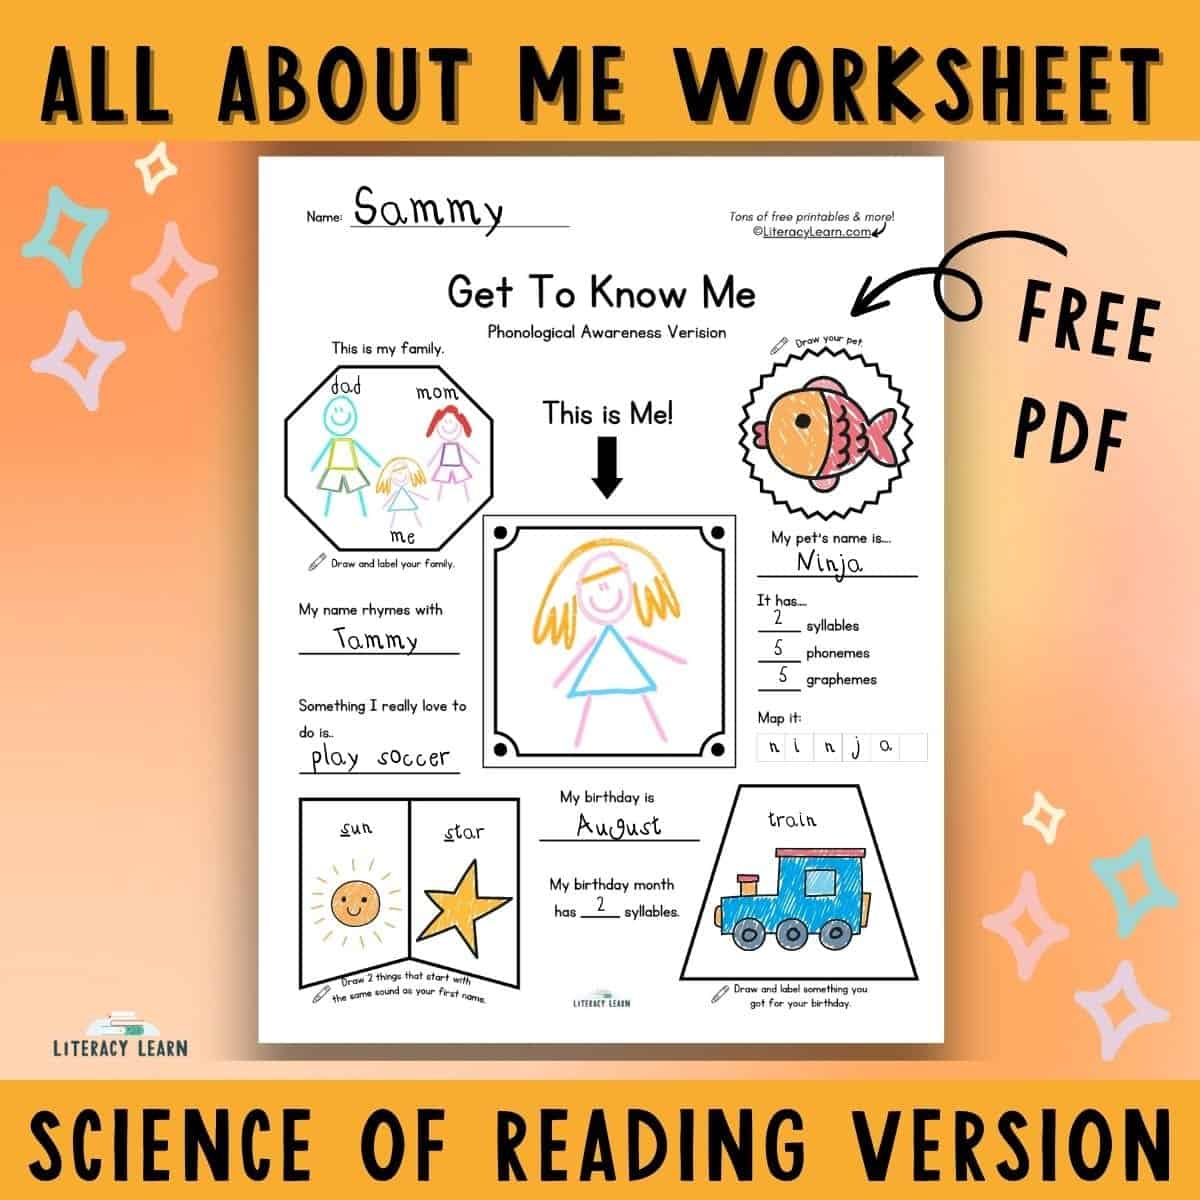 Colorful graphic with text, "All About Me Worksheet - Science of Reading Version."